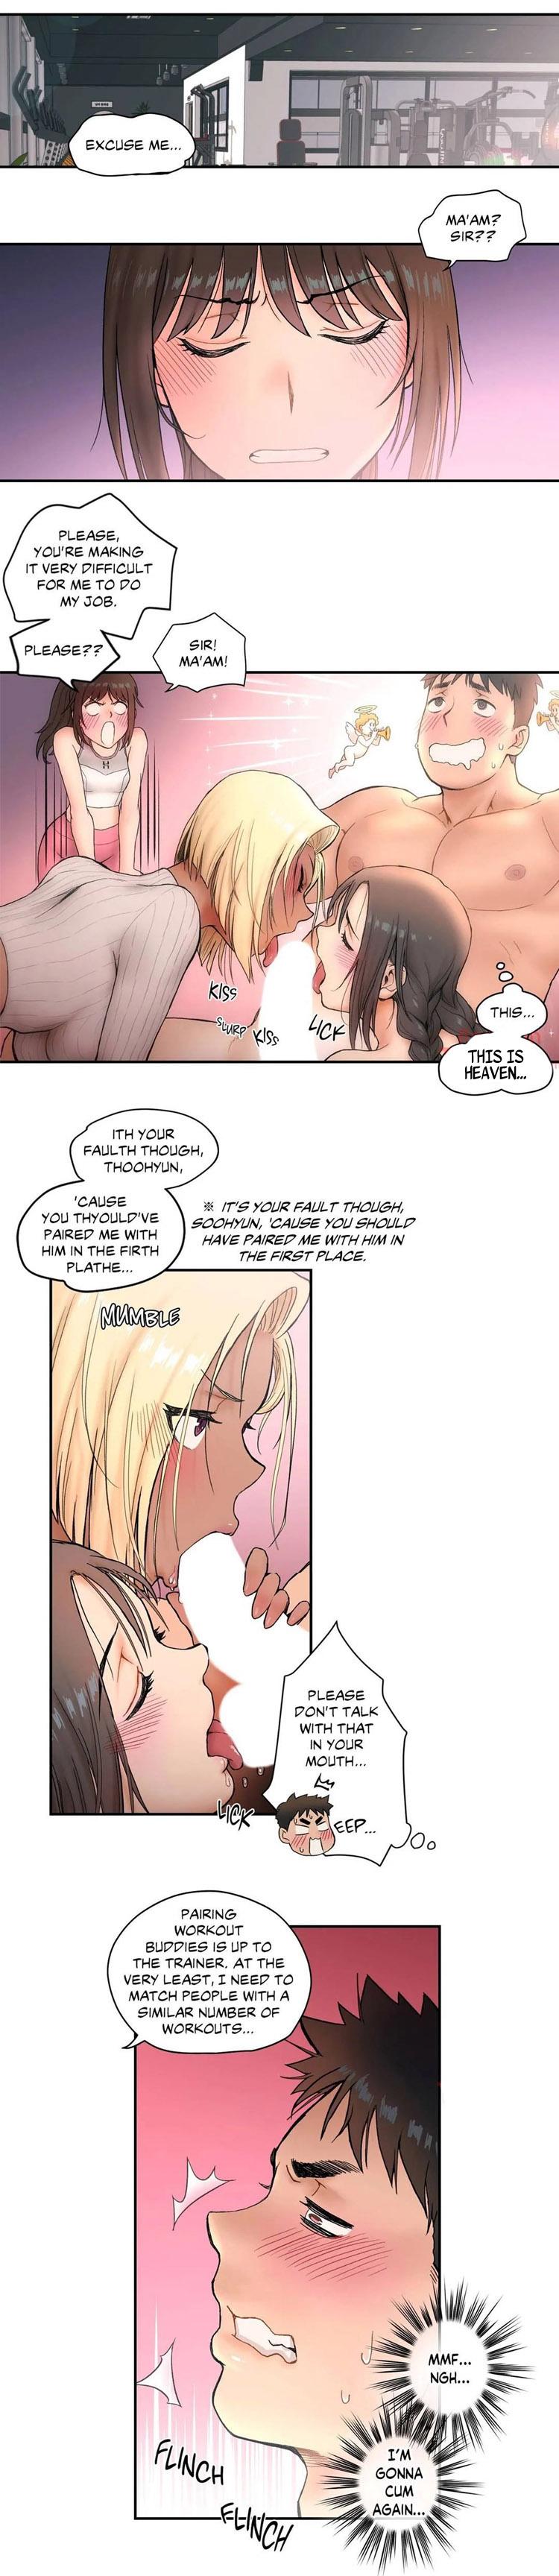 Sexercise Ch.8/? 73